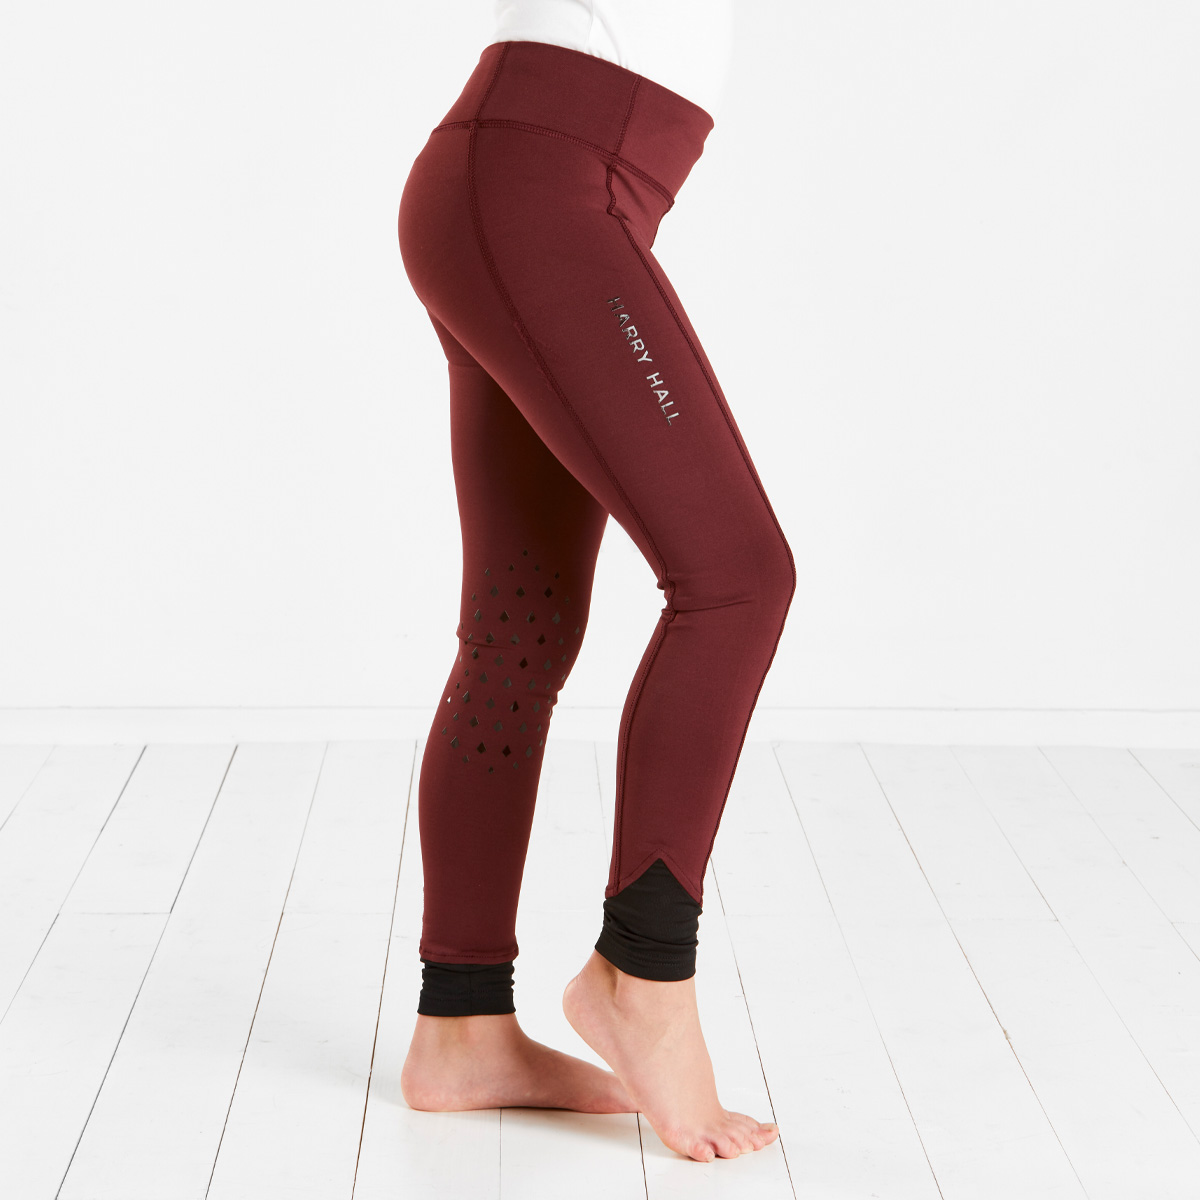 ELATION Riding Breeches for Women Red Label – Easy Pull-On Equestrian Riding  Pants (Burgundy 32R) : Amazon.in: Clothing & Accessories